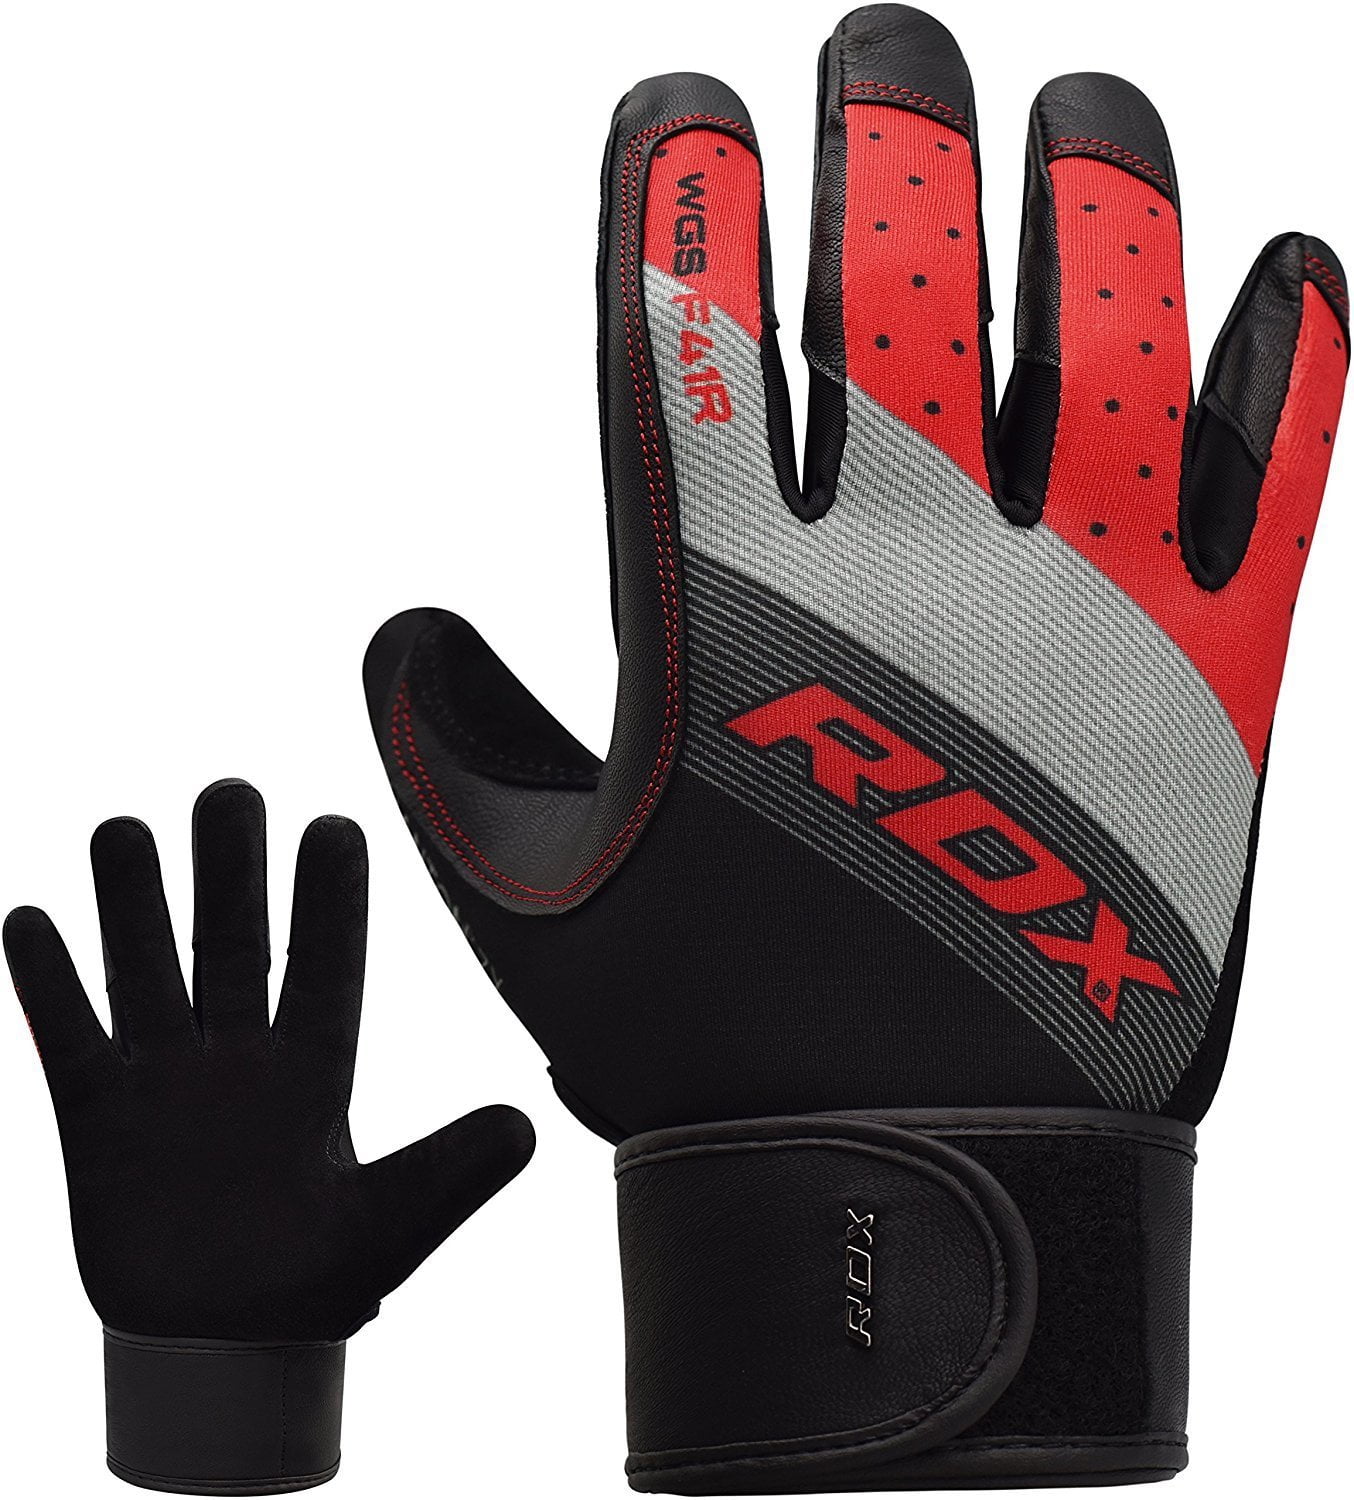 RDX Weight Lifting Gym Training Gloves BodyBuilding Fitness WorkOut Exercise F7R 